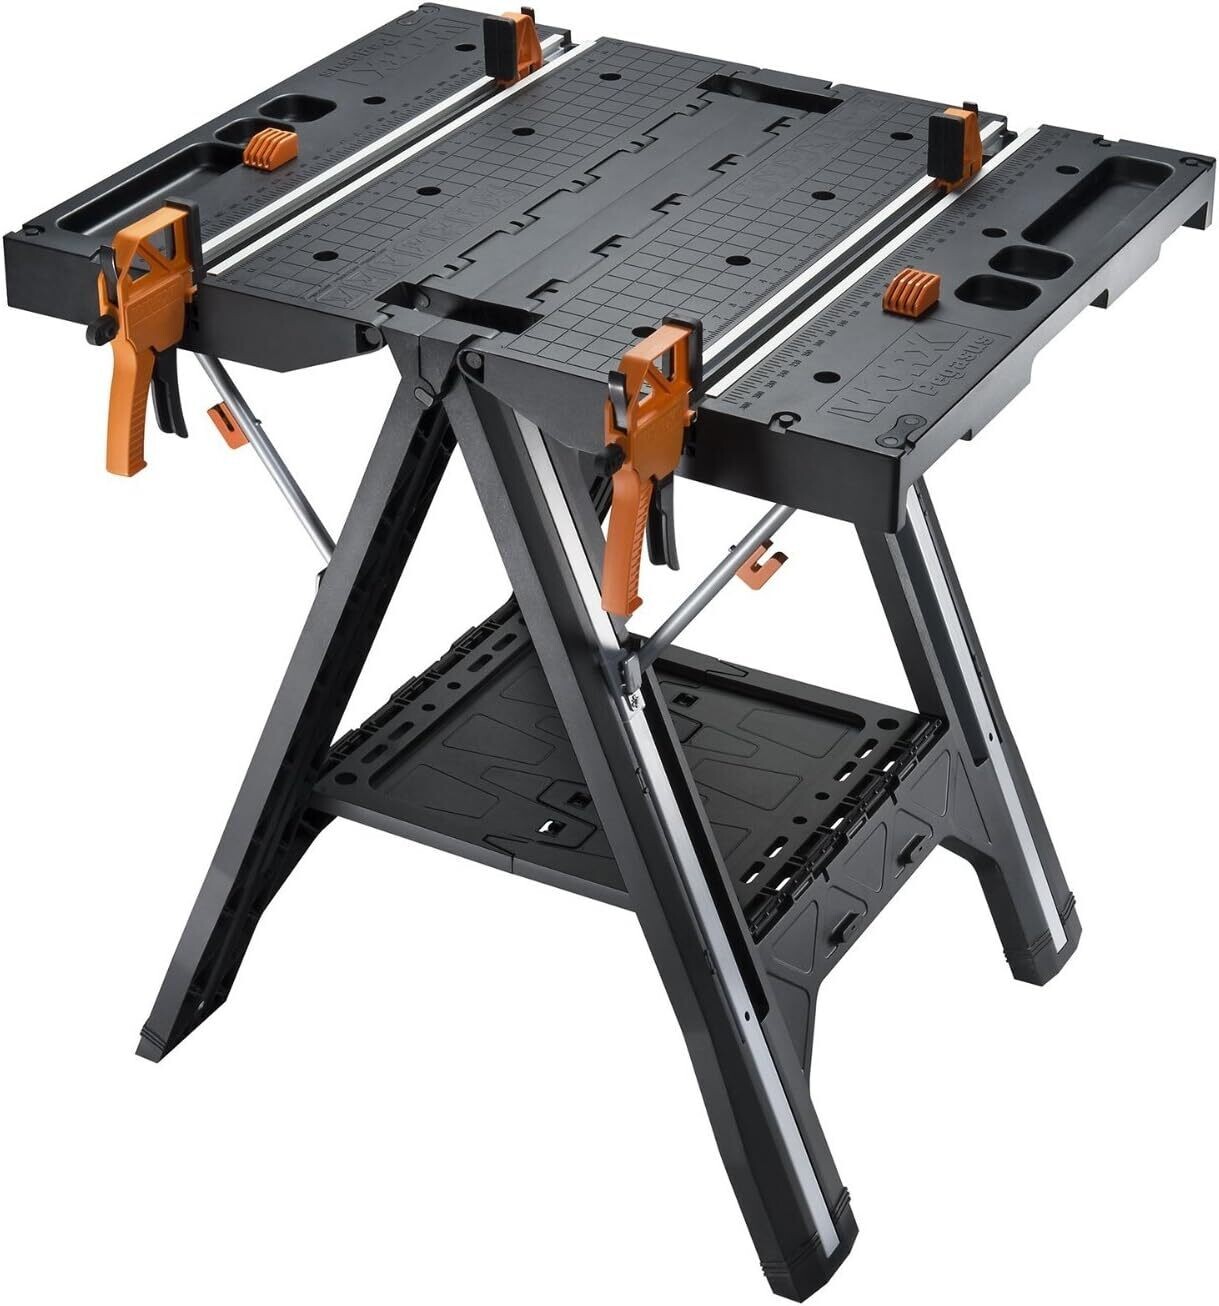 Multi-Use Work Table and Sawhorse with Quick Clamps and Holding Pegs